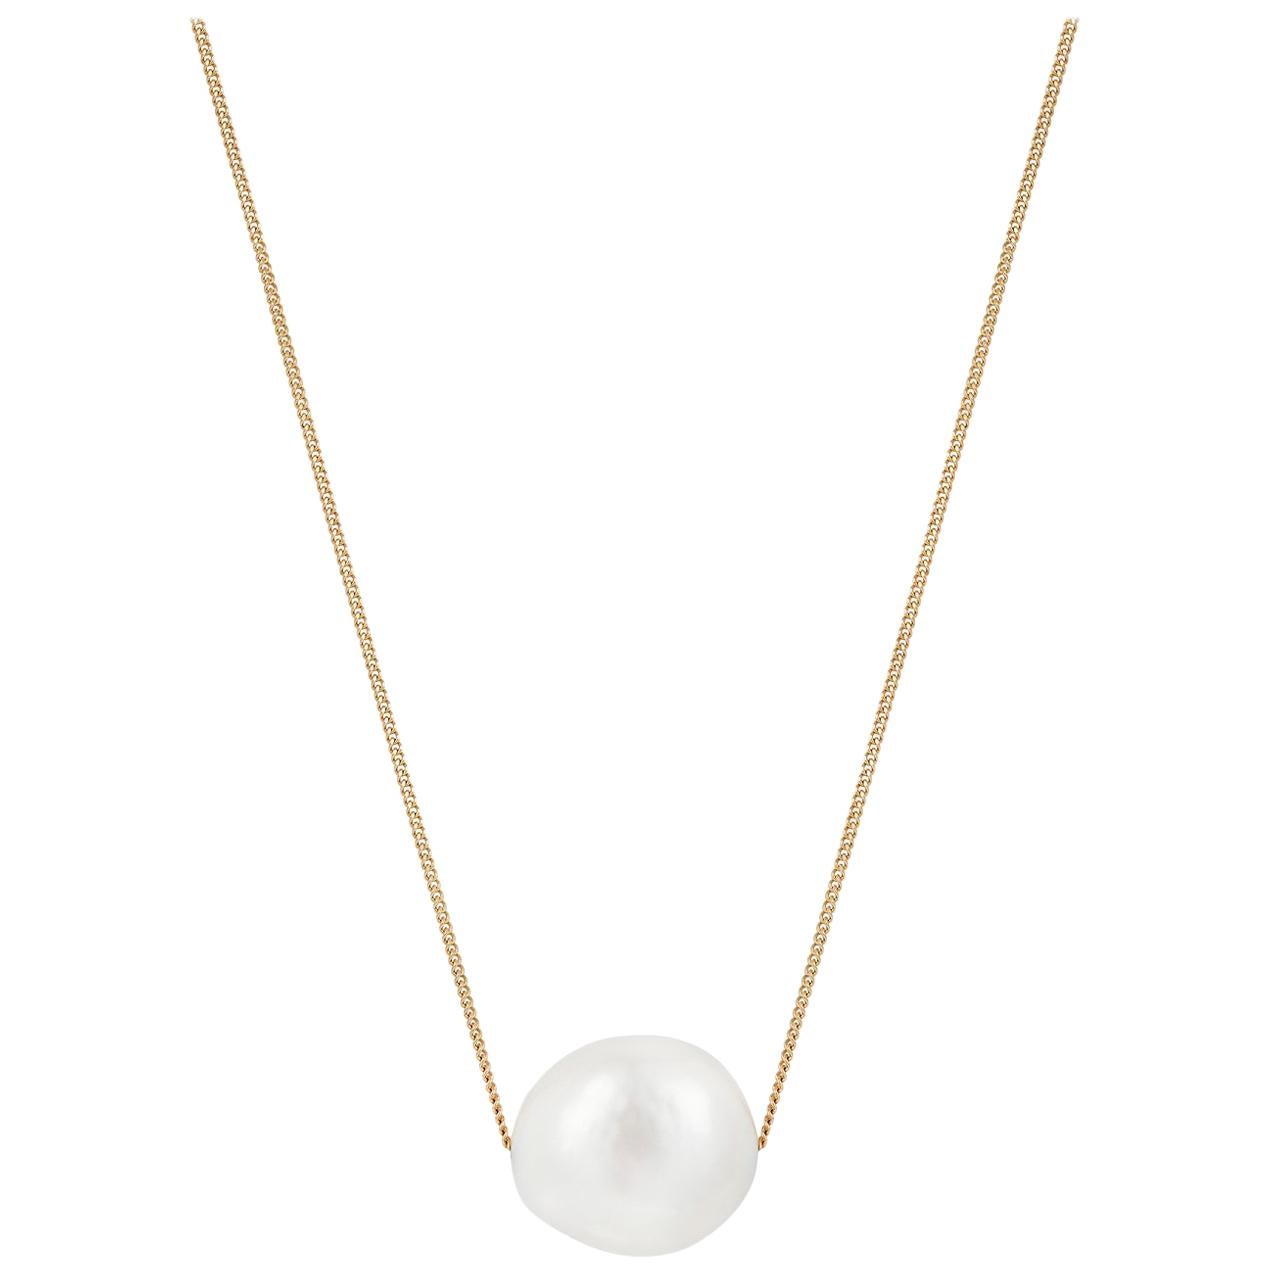 Minka Gems, Floating Pearl Necklace, Gold chain with baroque pearl